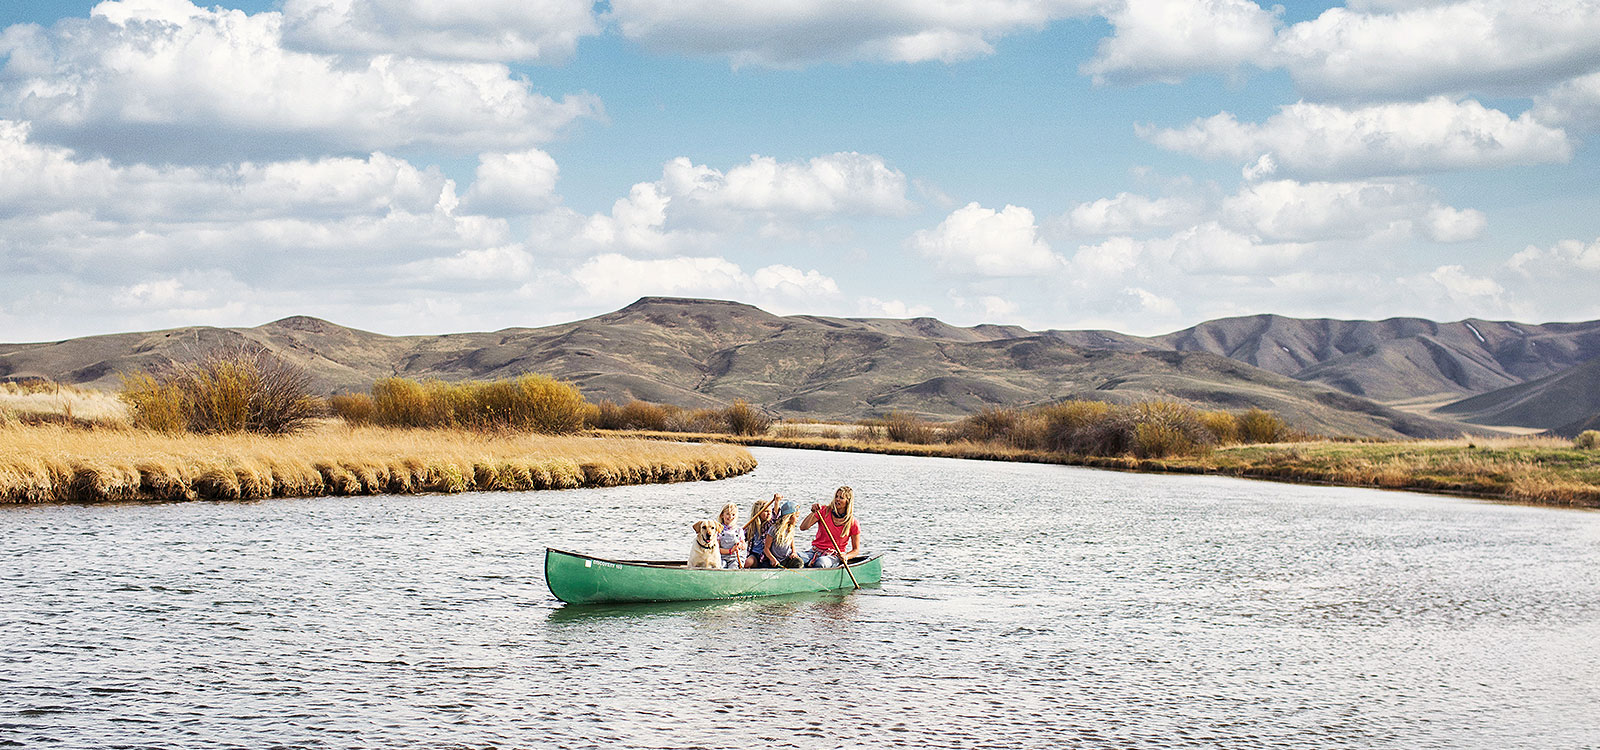 Erika Hill and her daughters riding a boat in a lake of Sun Valley